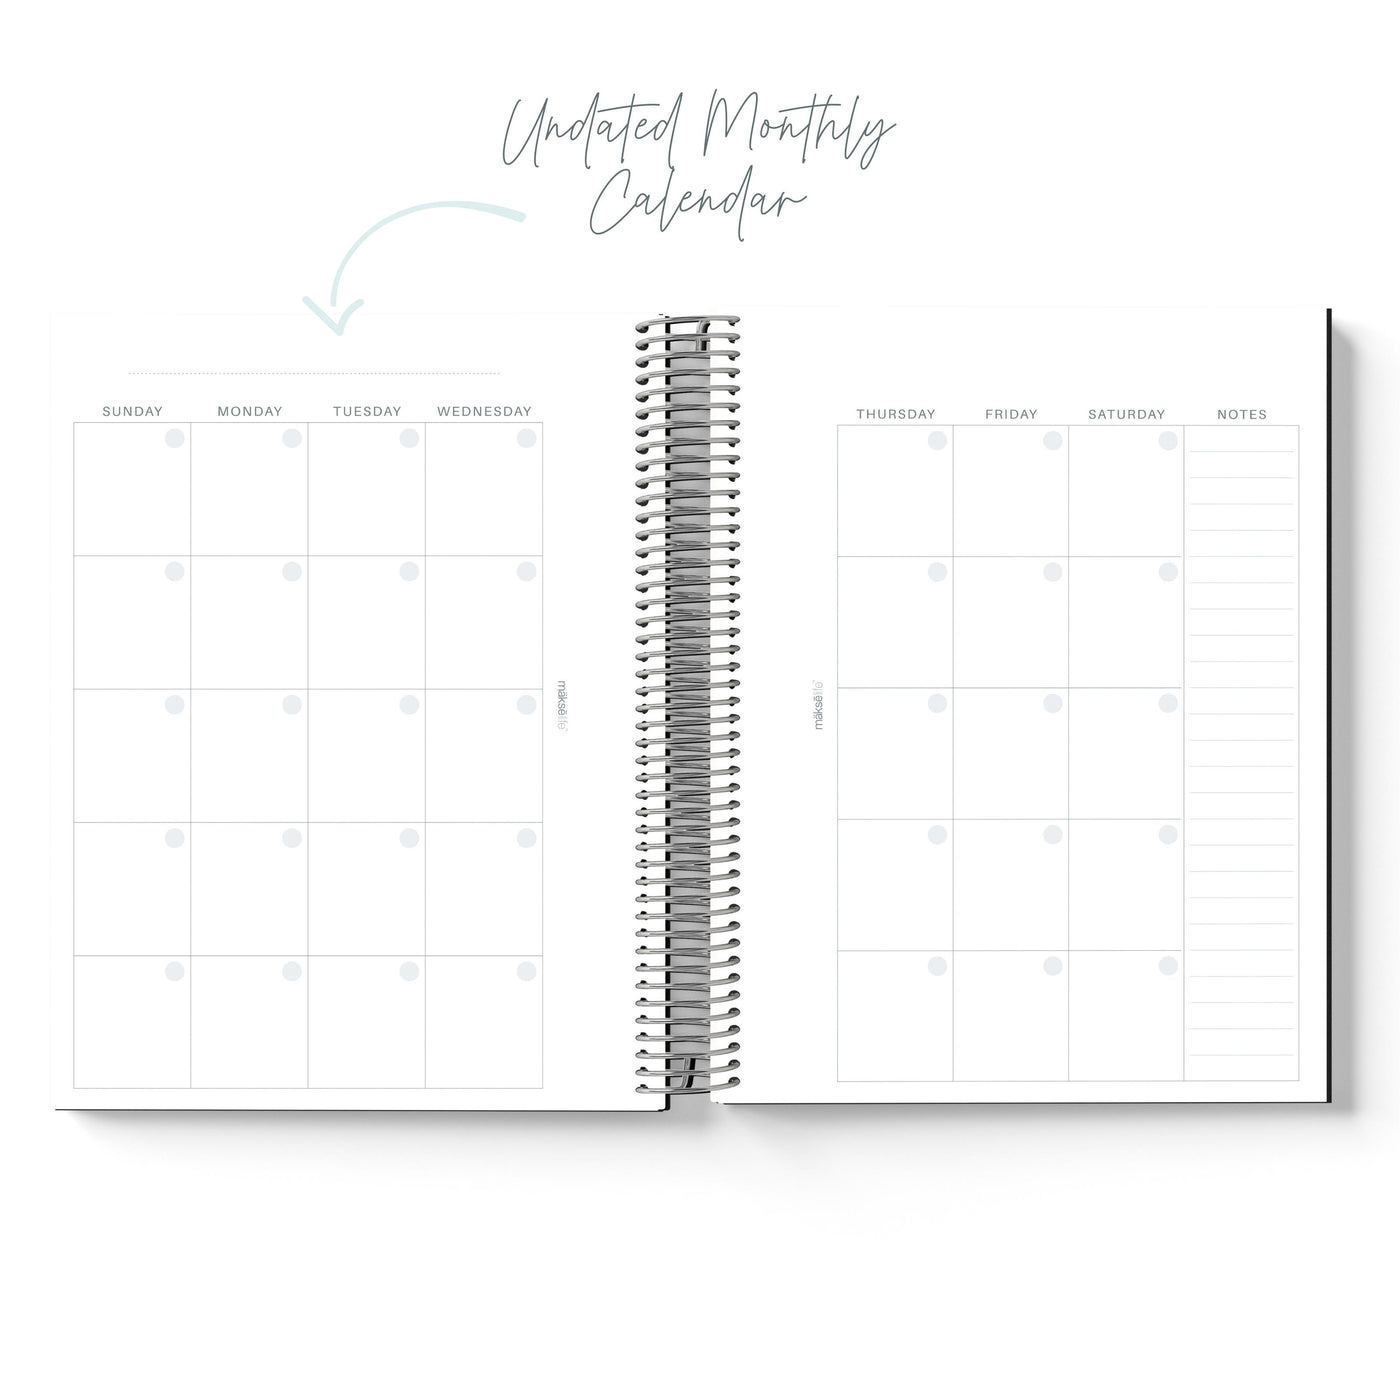 Quarterly Undated Goal-Setting + Daily Planner - Storm